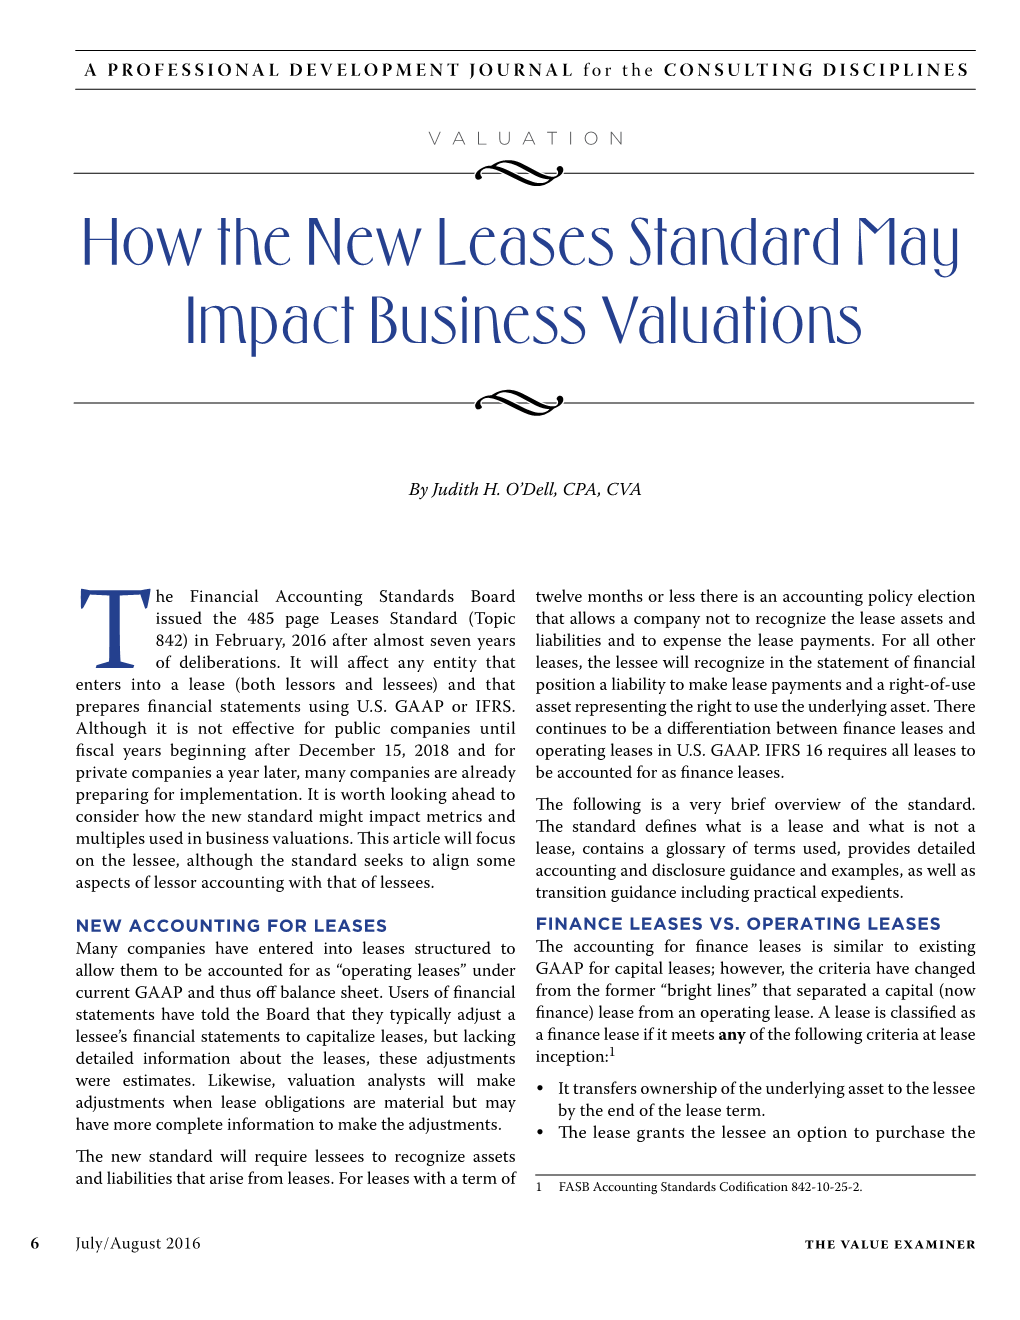 How the New Leases Standard May Impact Business Valuations •